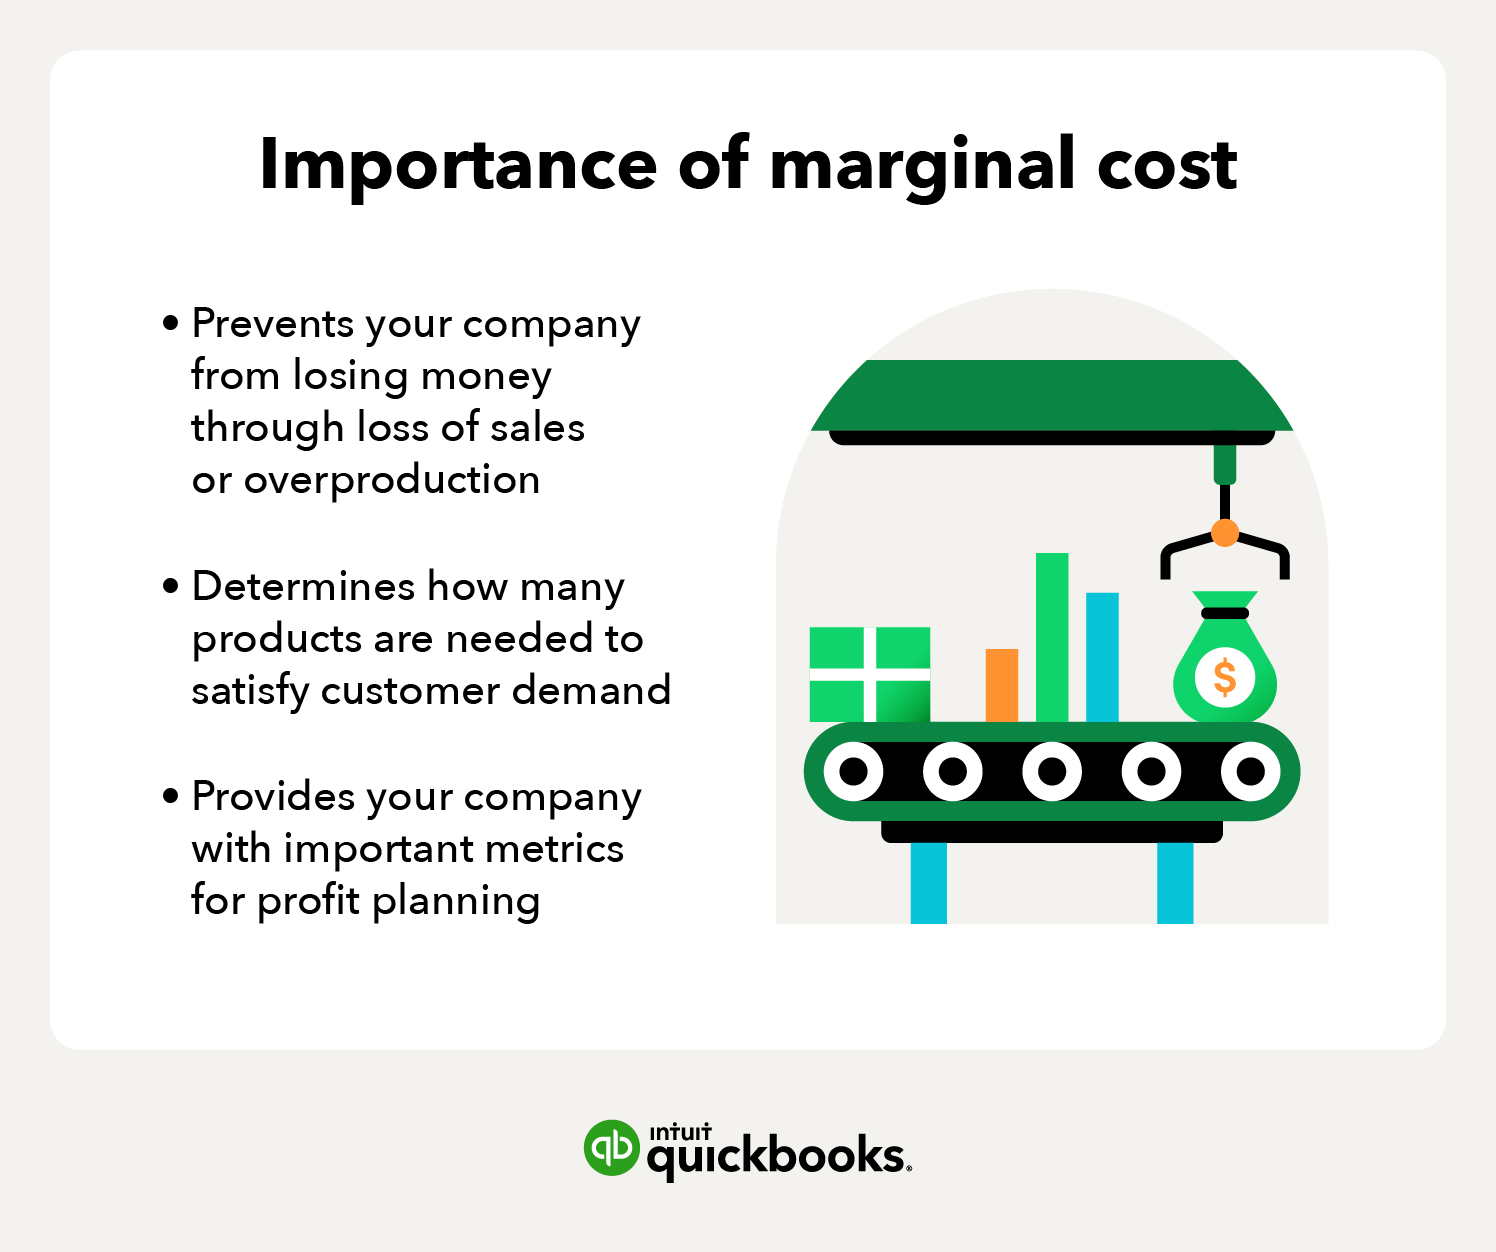 Importance of marginal cost showing a conveyor belt with money, text includes loss prevention, customer demand and profit planning metrics